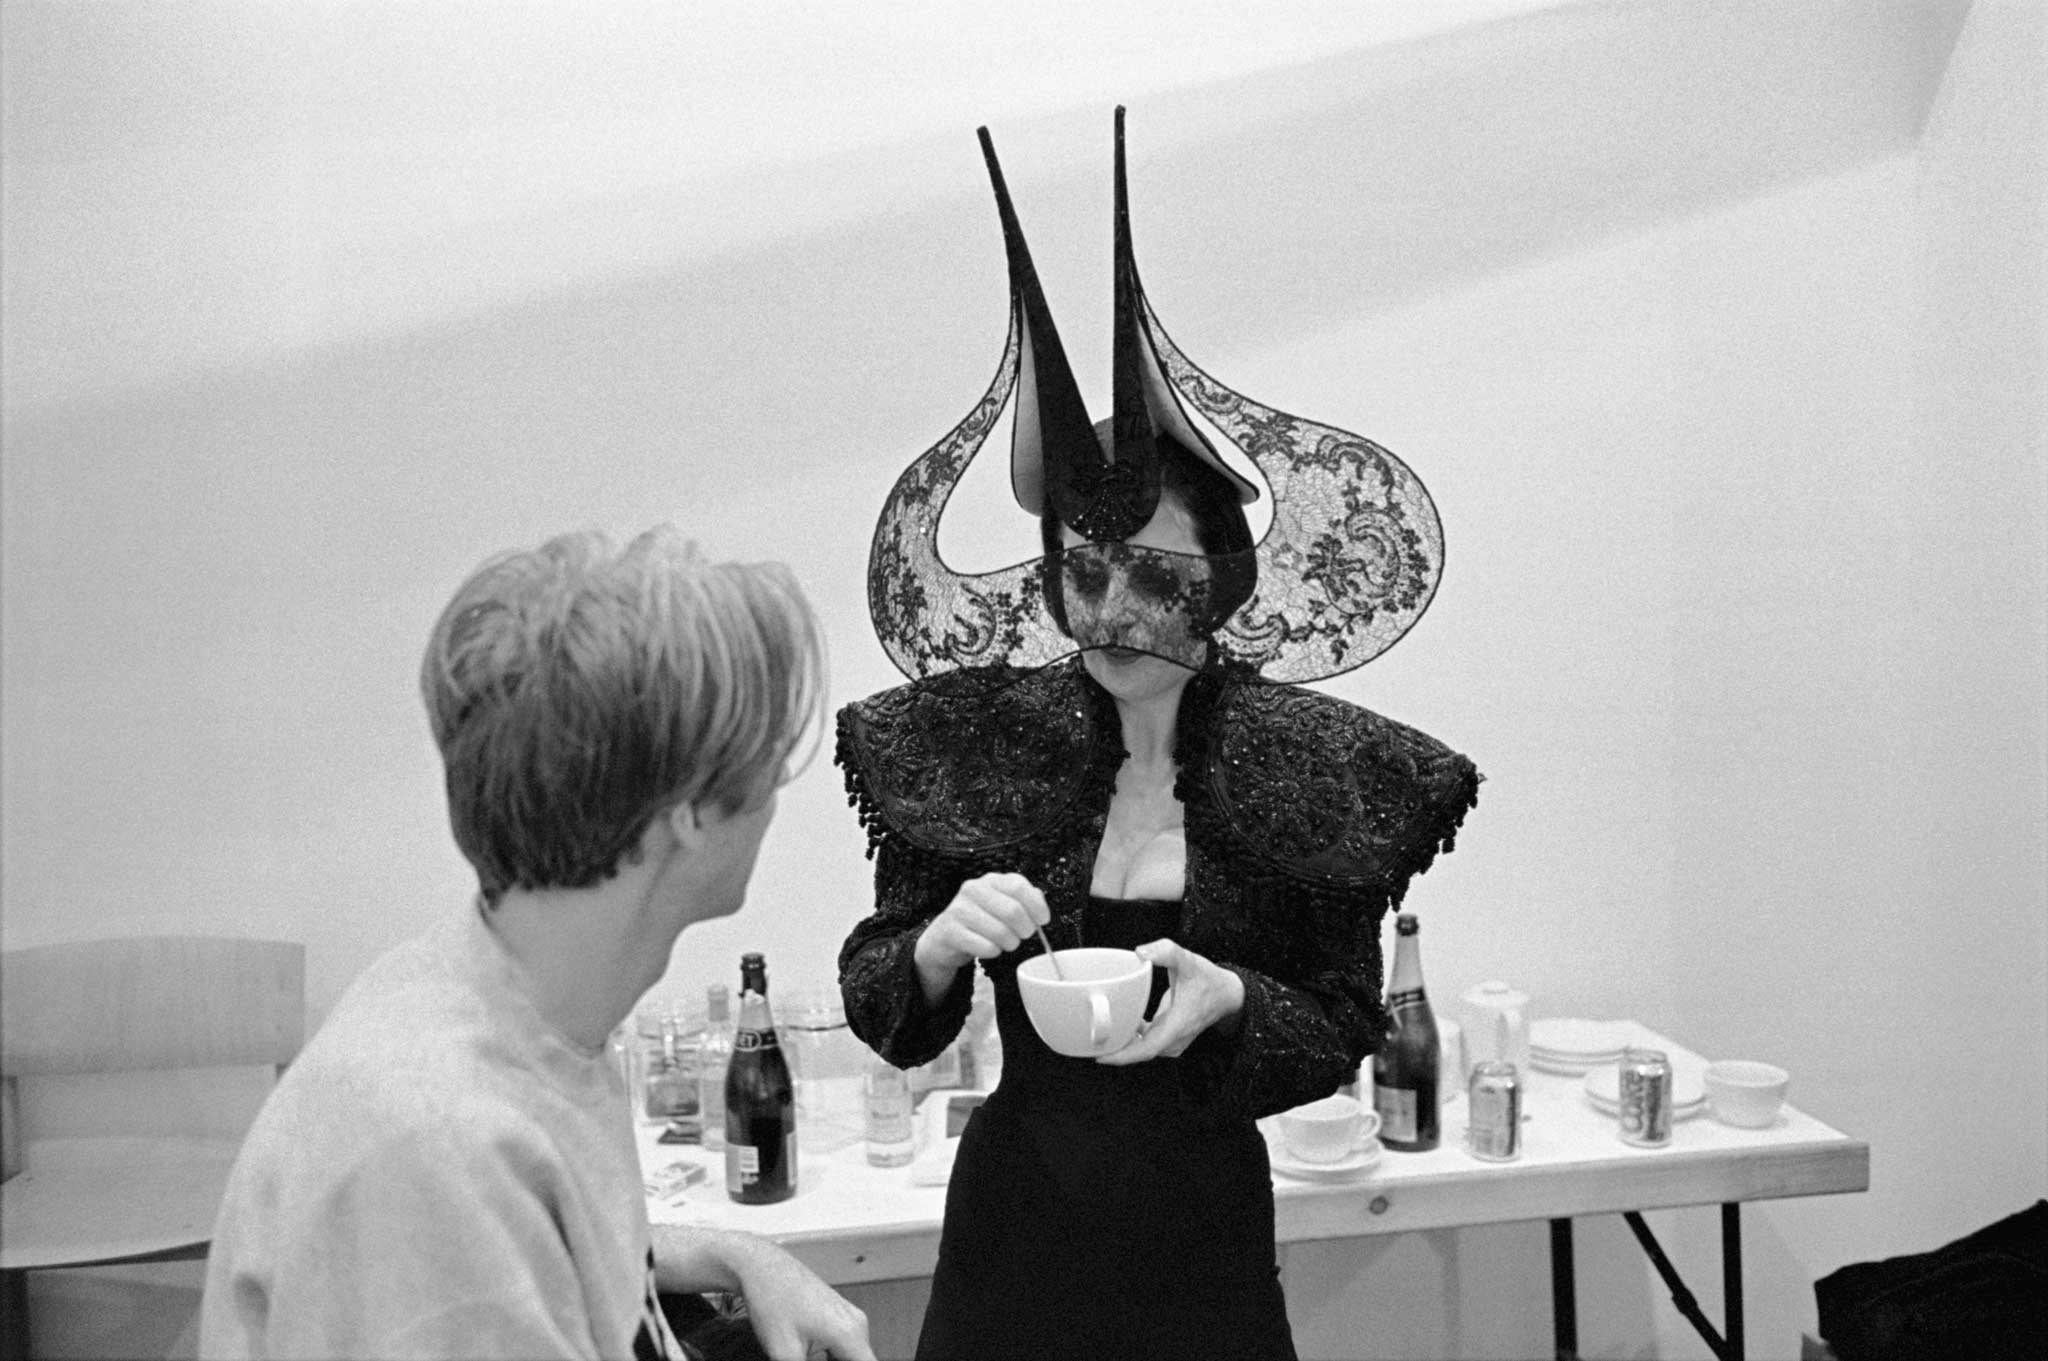 Isabella Blow in a 2002 Treacy hat. He says: 'Isabella Blow helped hats enormously - she was fearless'